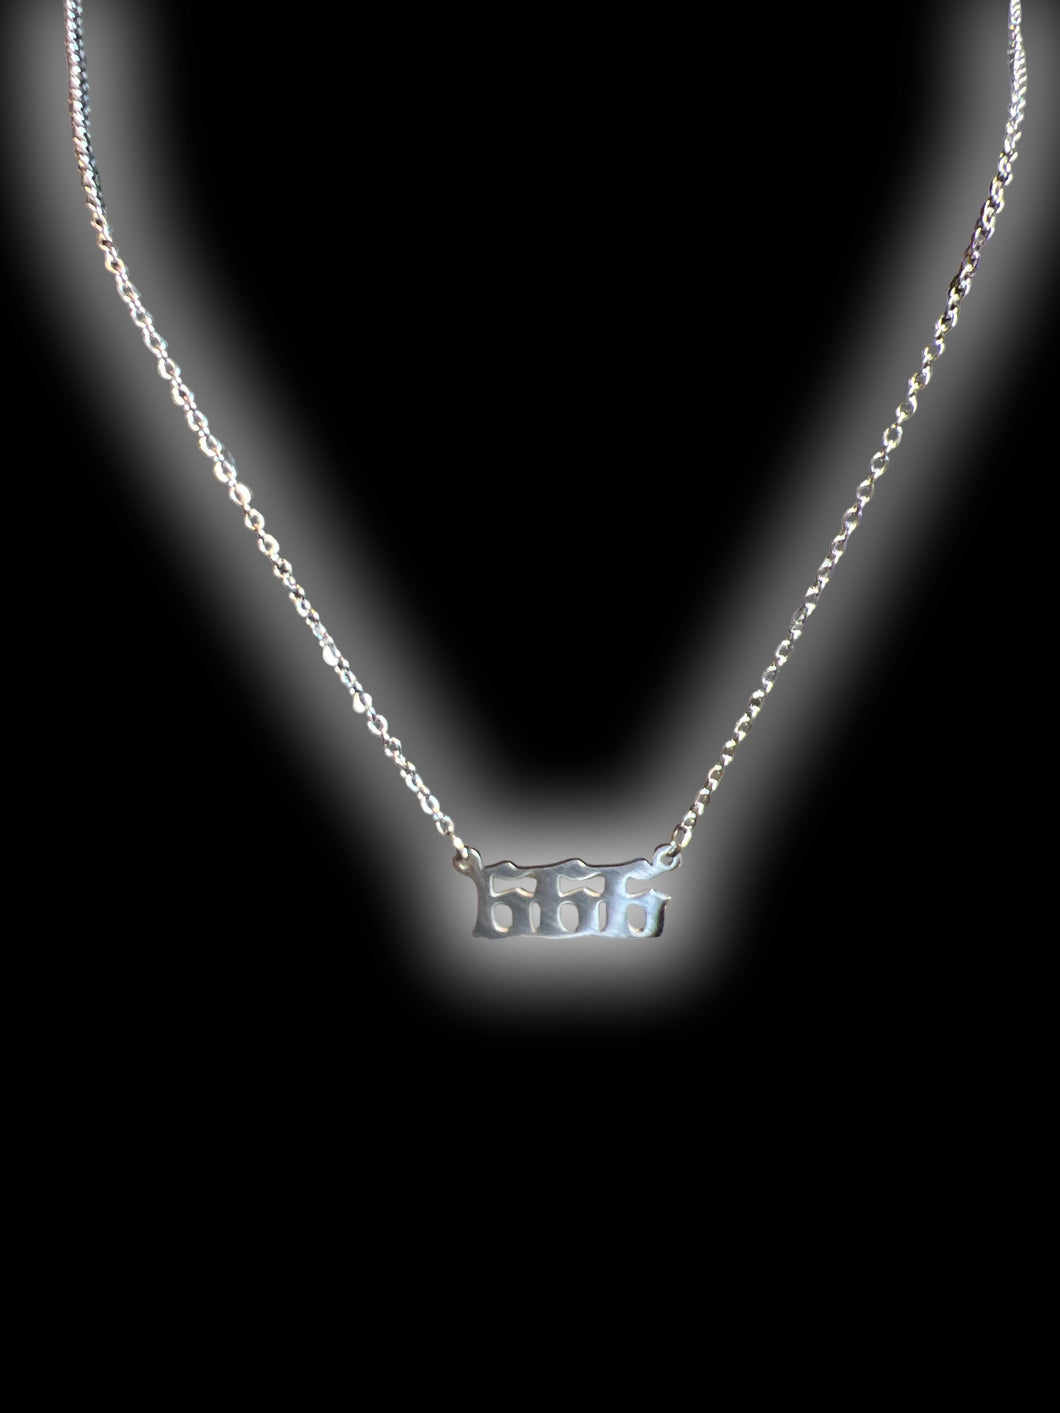 Silver-like angel number necklace “666”